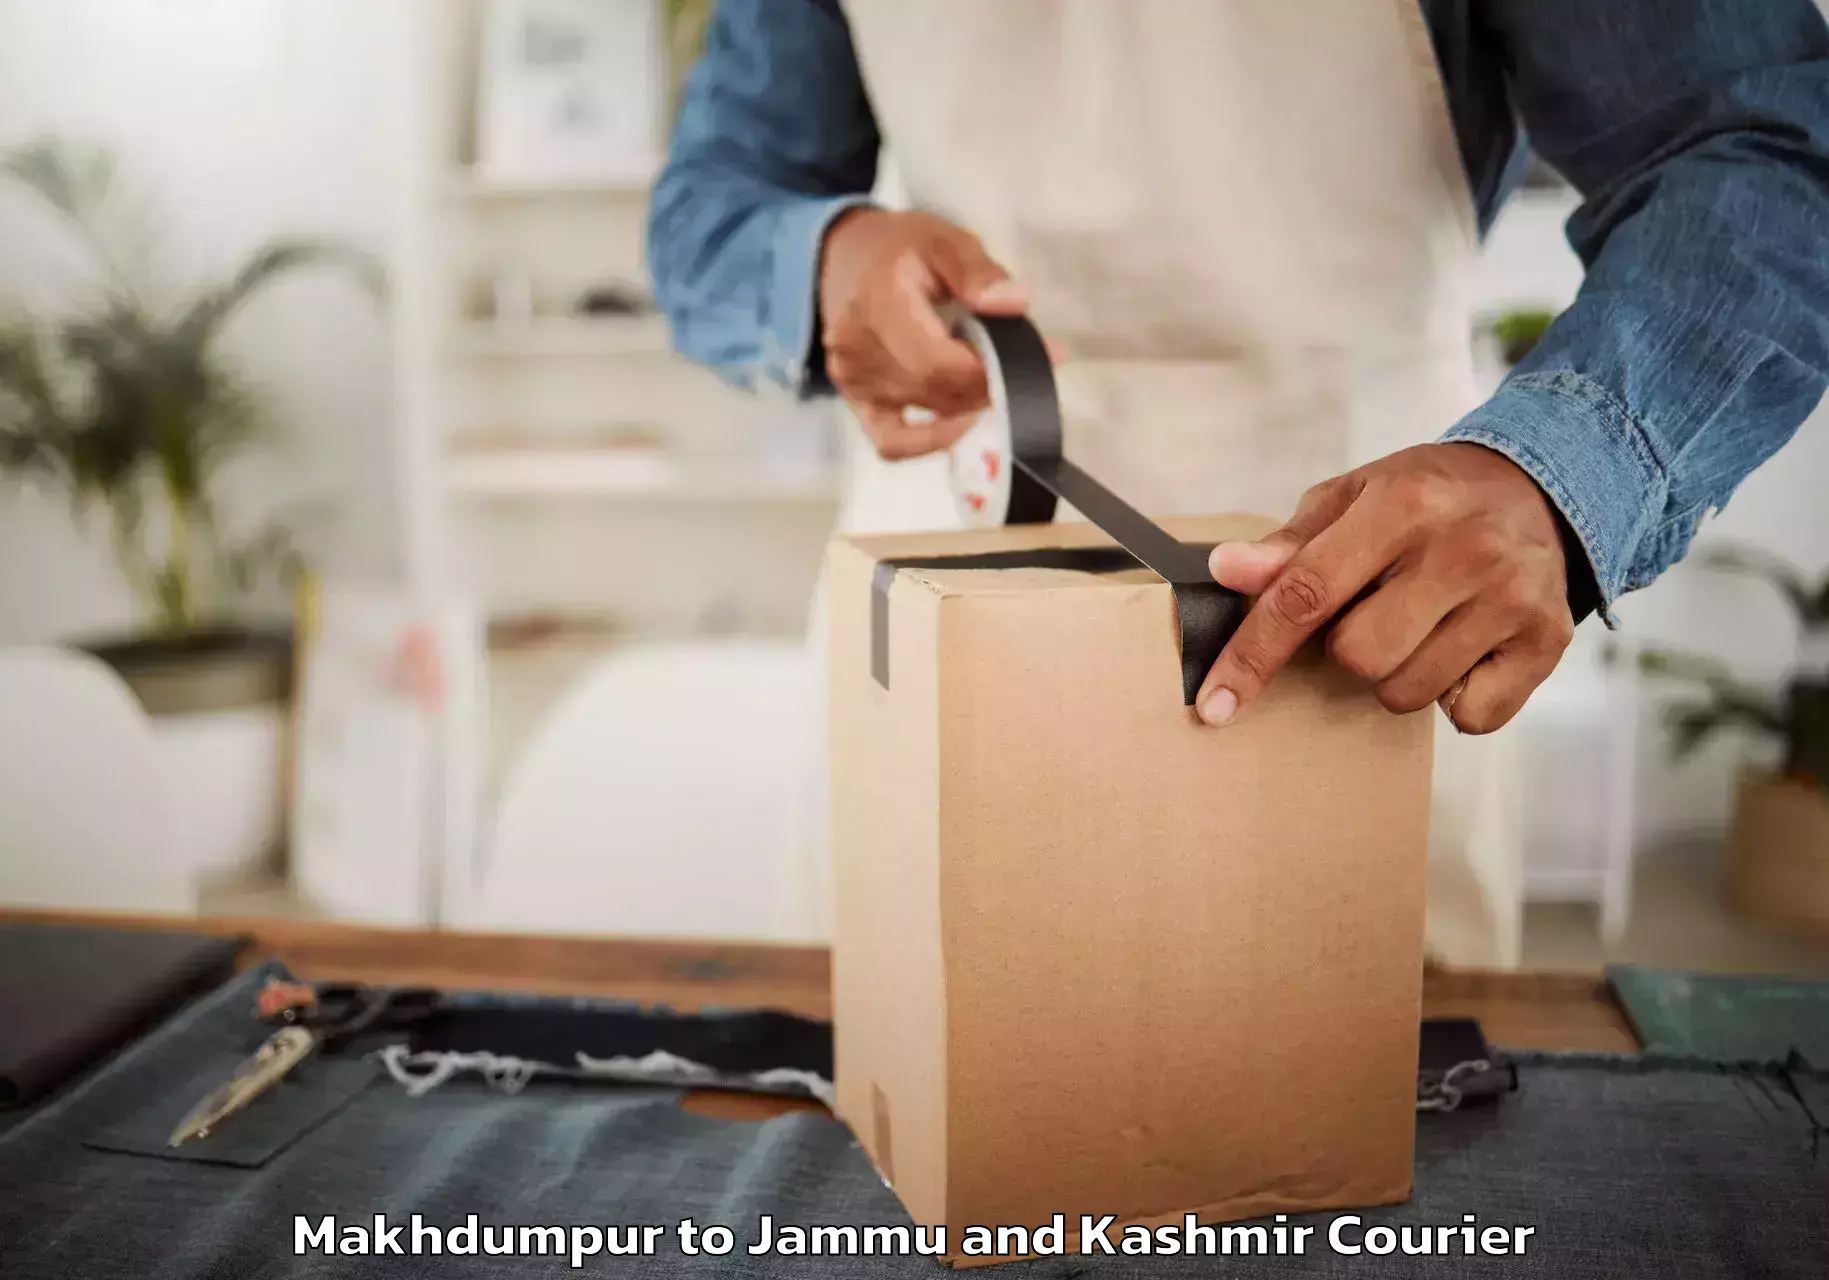 Professional furniture movers in Makhdumpur to University of Jammu